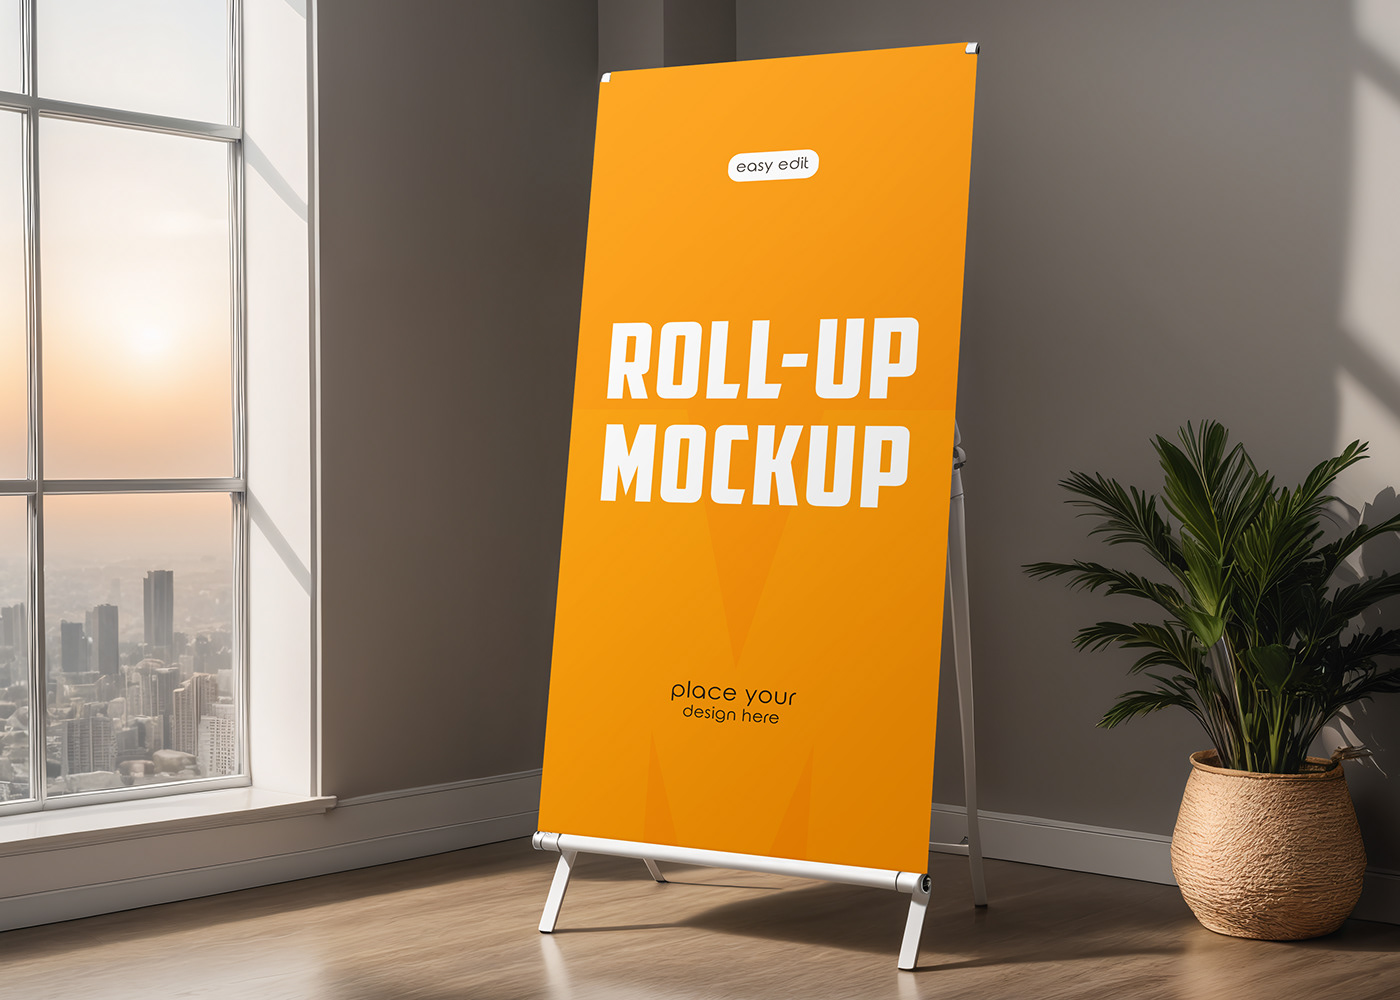 free freebie Mockup Roll Up Roll-Up Signage rollup Advertising  banner Stand